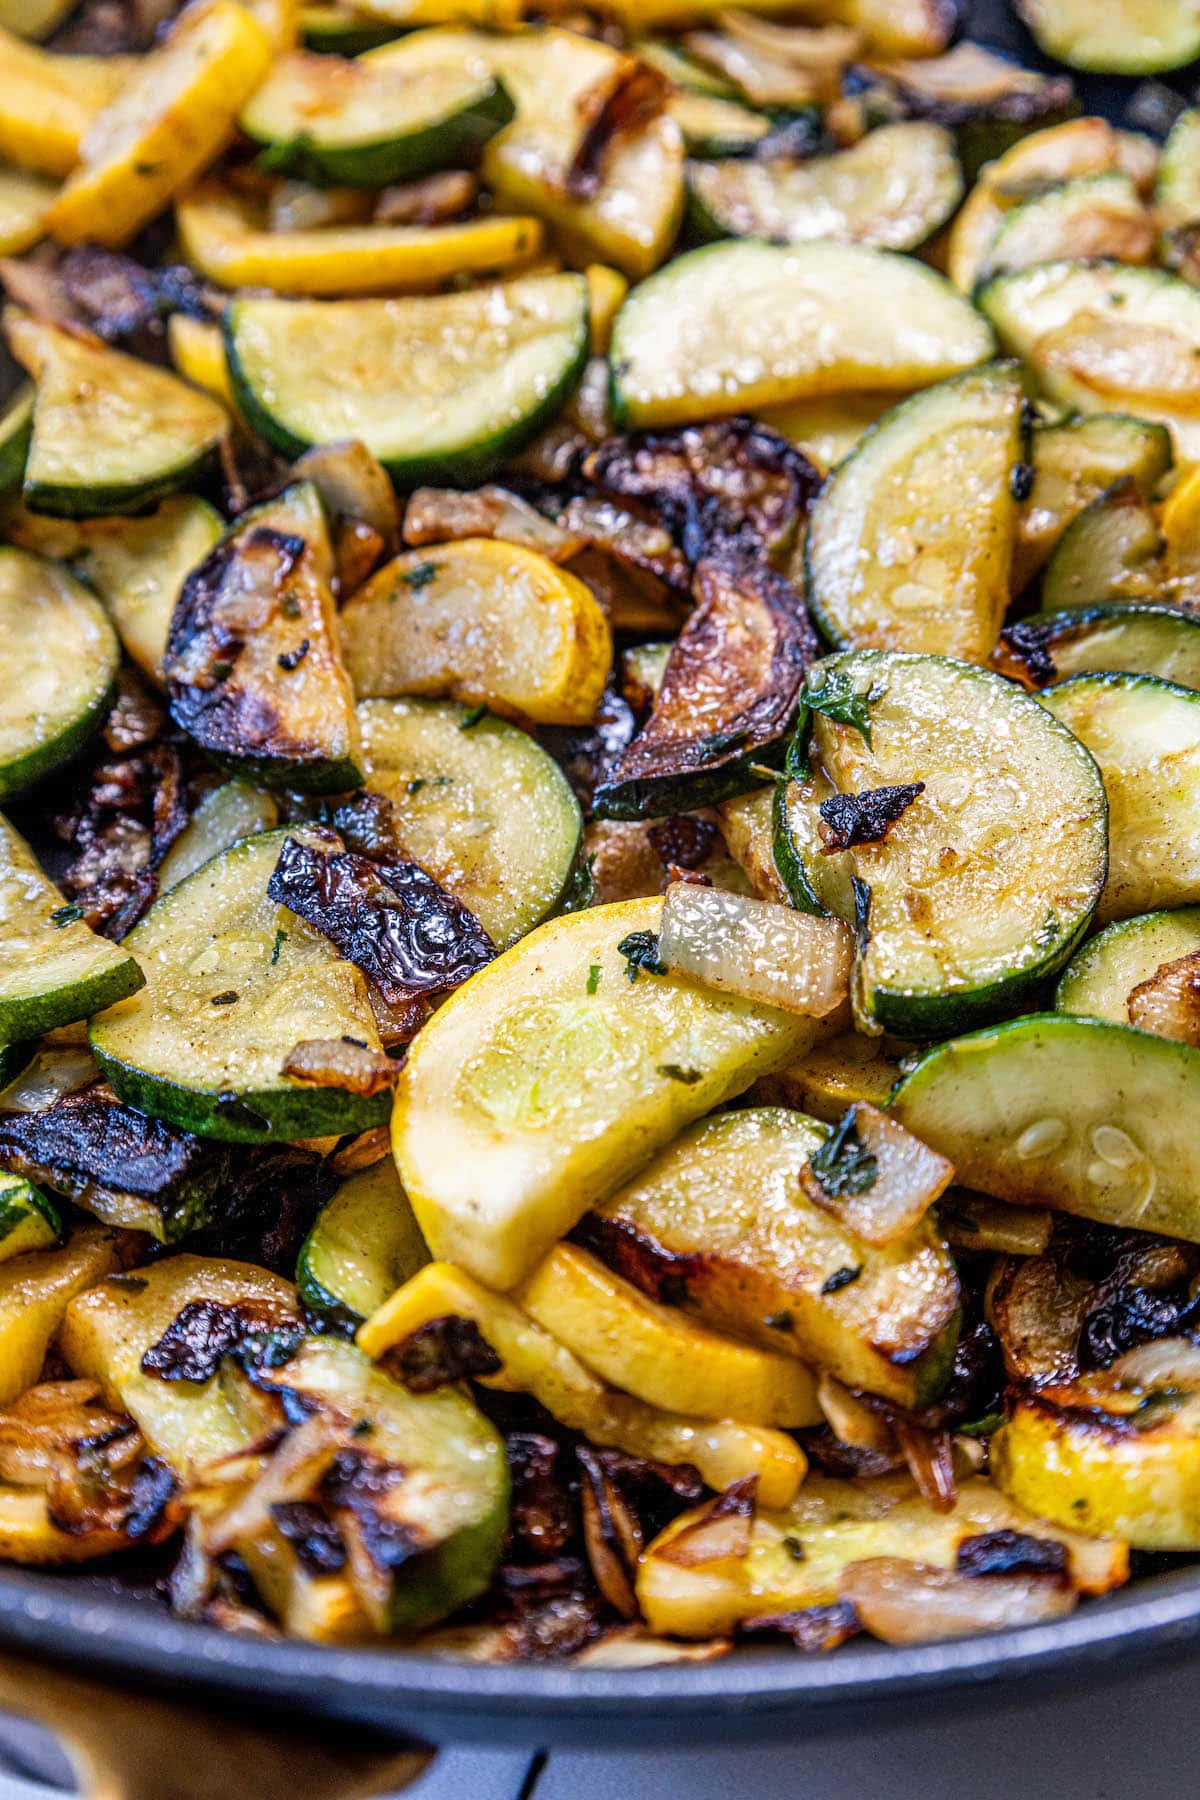 A keto recipe for pan fried zucchini and squash, served as a side dish.